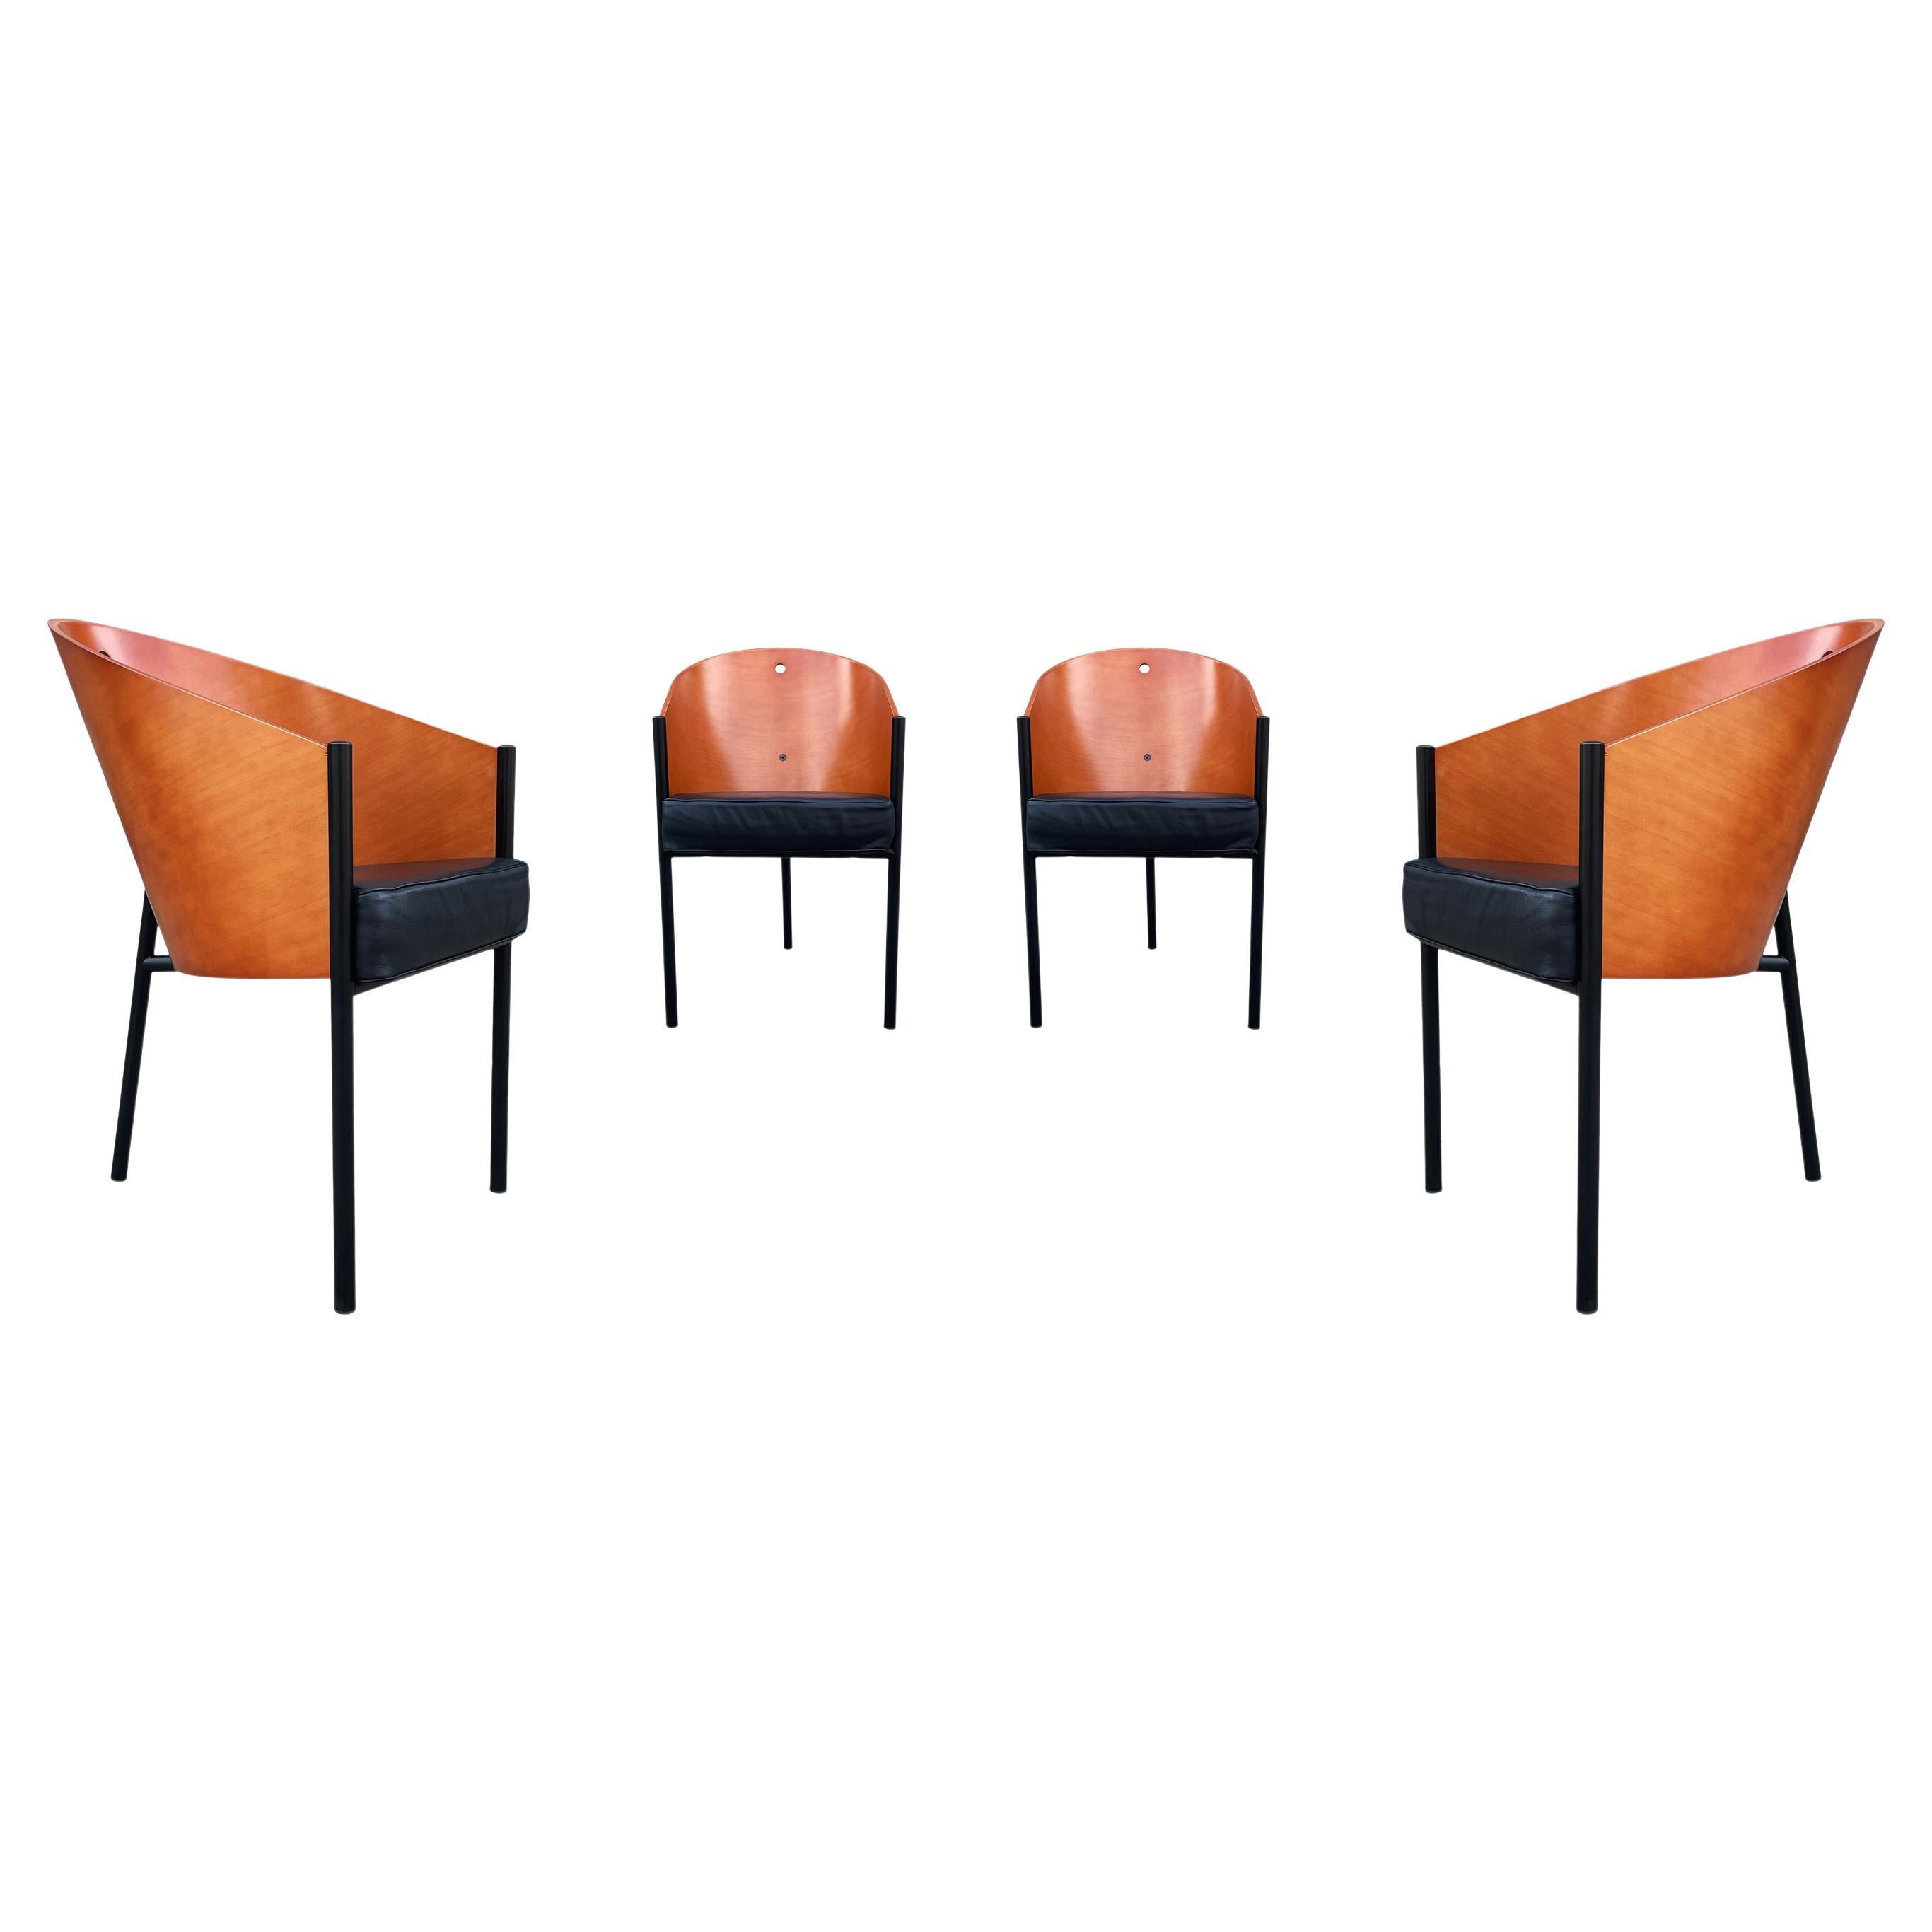 Set of Four Mid-Century Modern Dining Chairs by Philippe Starck for Driade